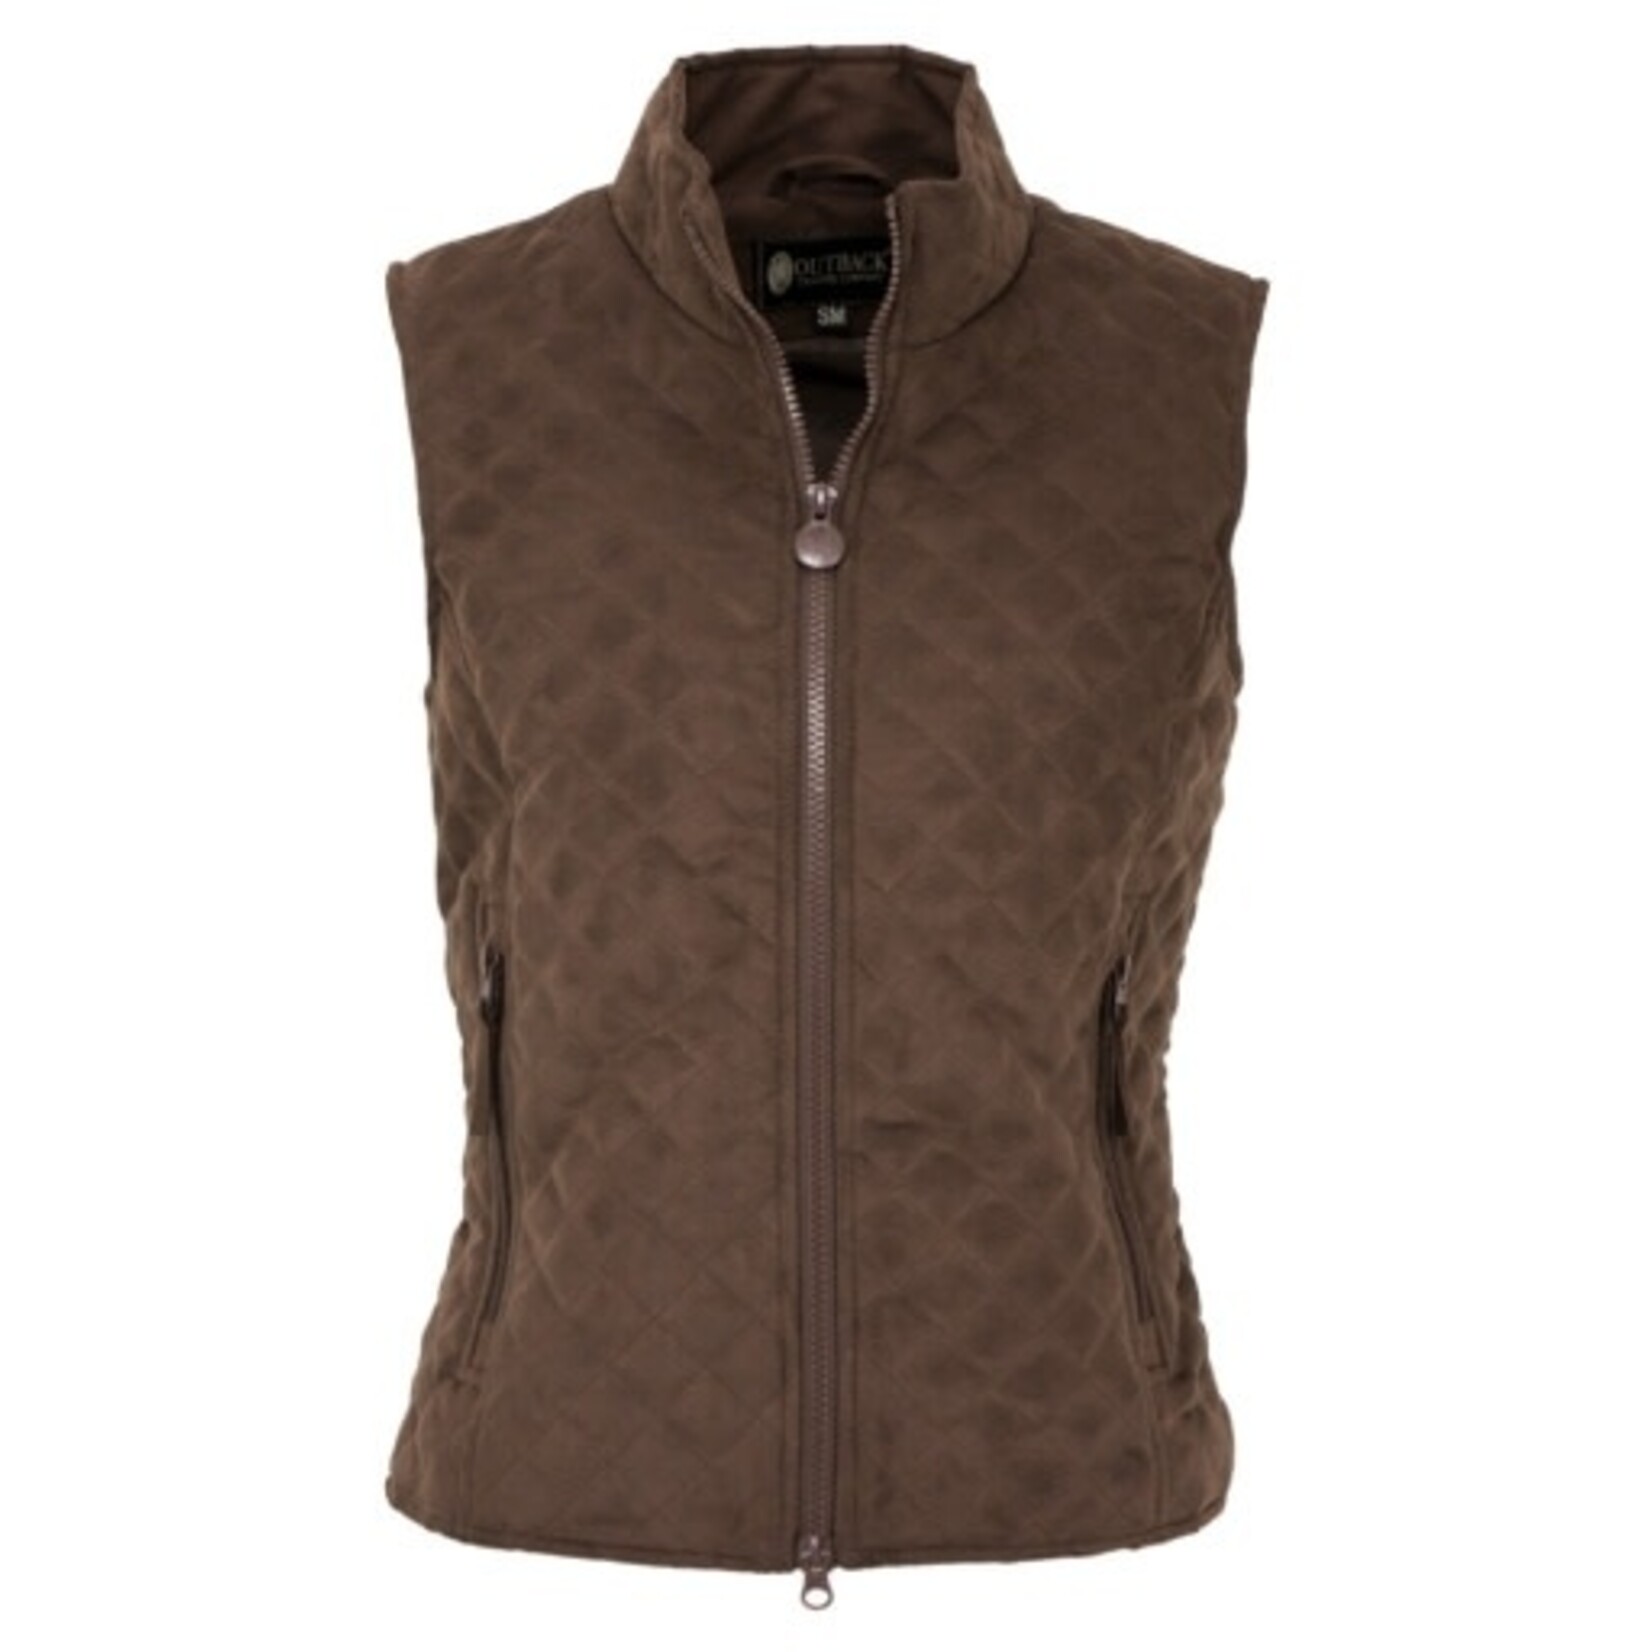 Outback Trading Co. Outback Trading Co. Ladies Grand Prix Vest